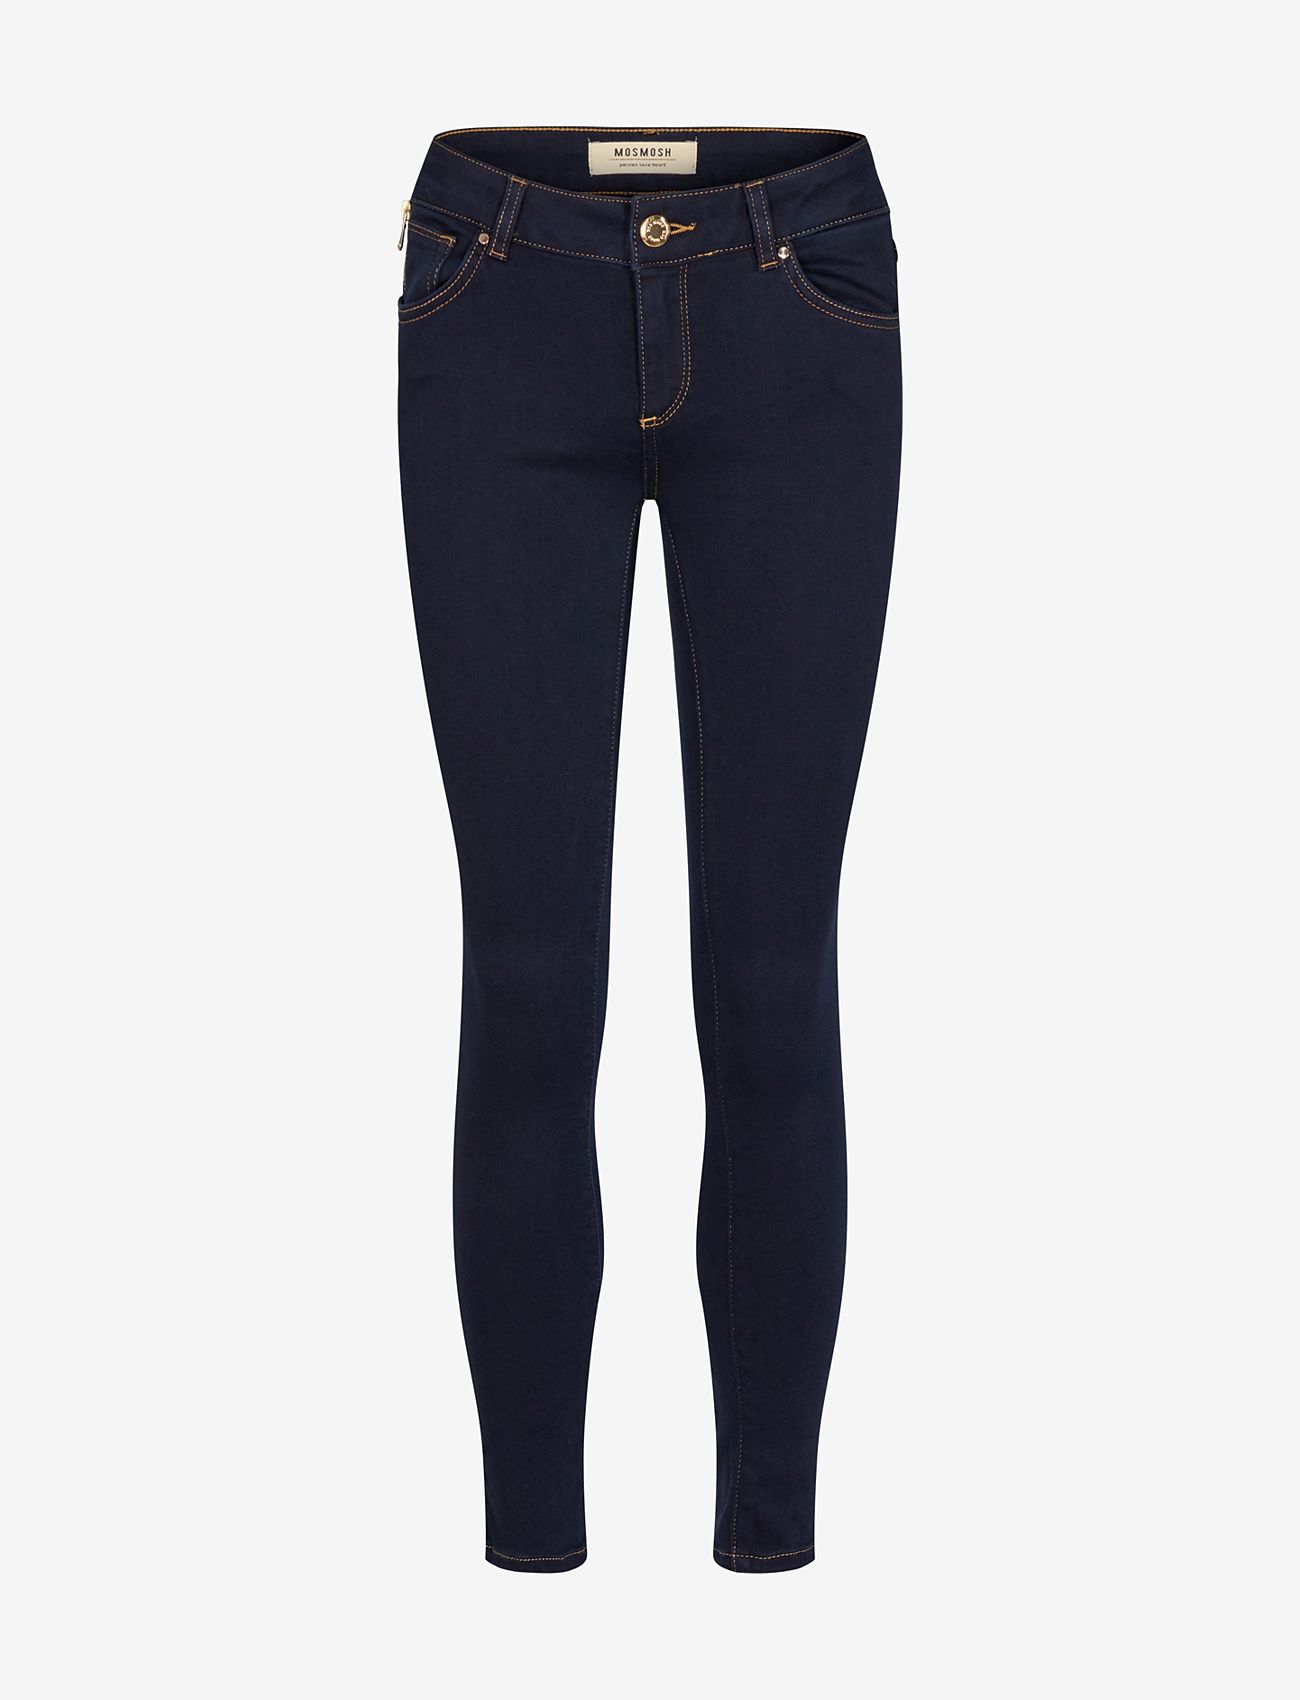 MOS MOSH 7/8 Silk Touch Jeans - Skinny jeans Boozt.com